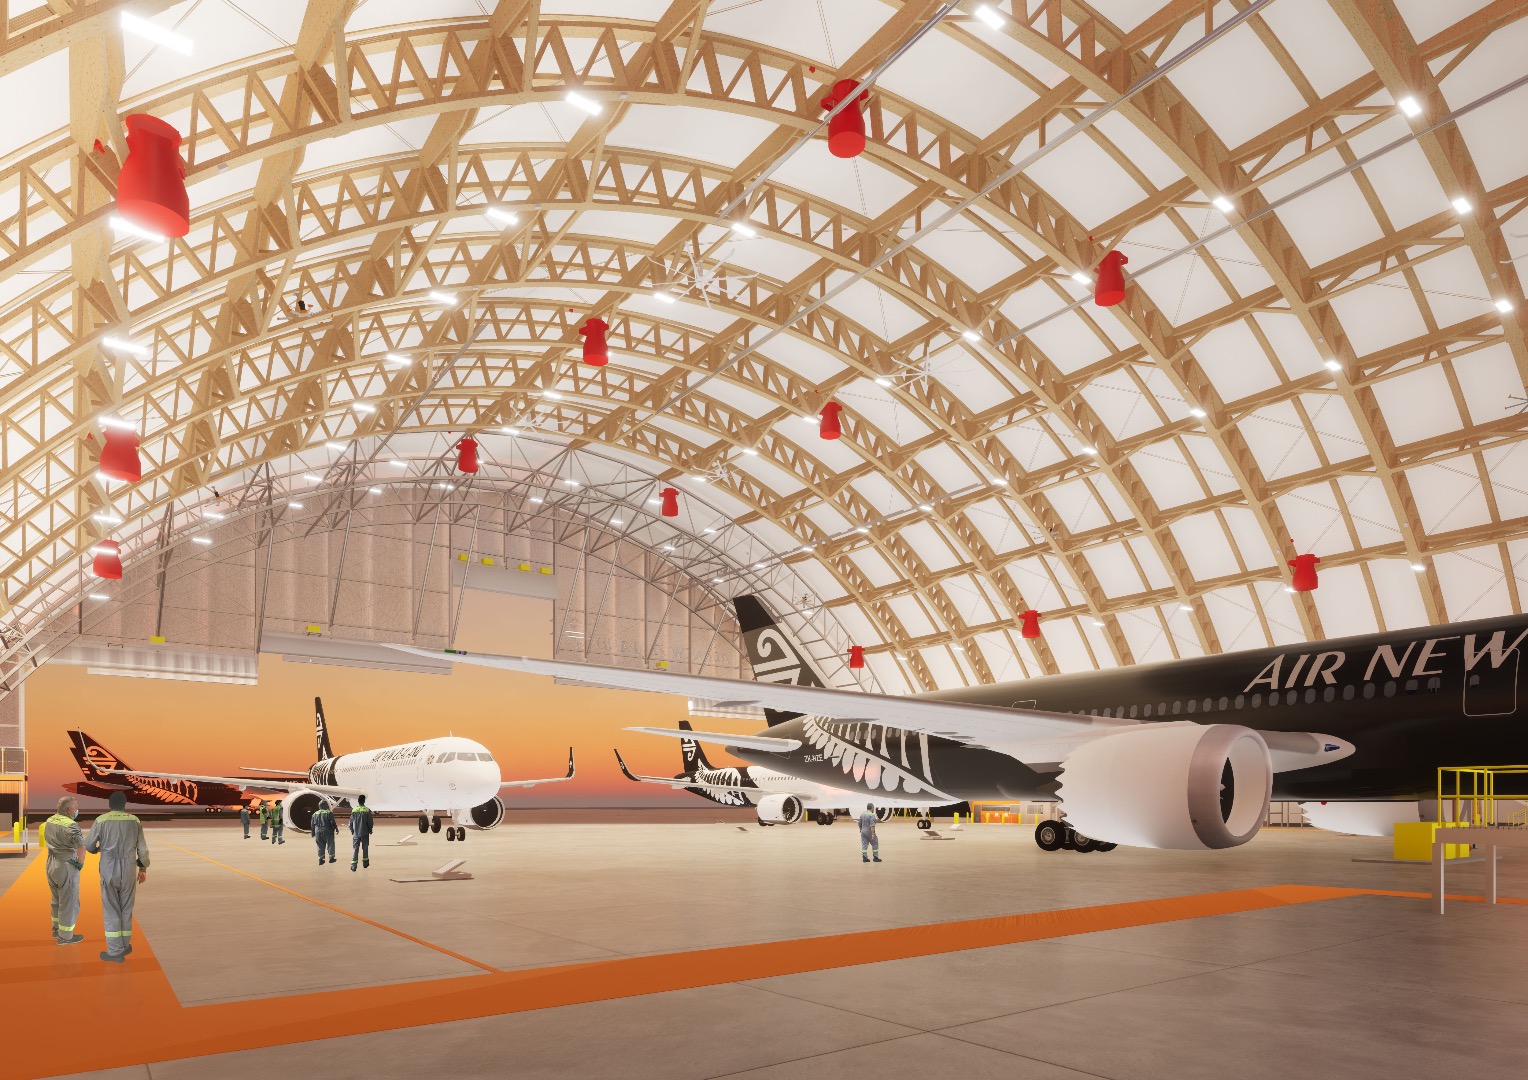 At one and a half times the size of the airline’s largest existing hangar, Hangar 4 will be able to house one wide-bodied aircraft, such as a Boeing 777-300 or 787-9, as well as two narrow-bodied aircraft, such as an A320 or an A321neo, at the same time.